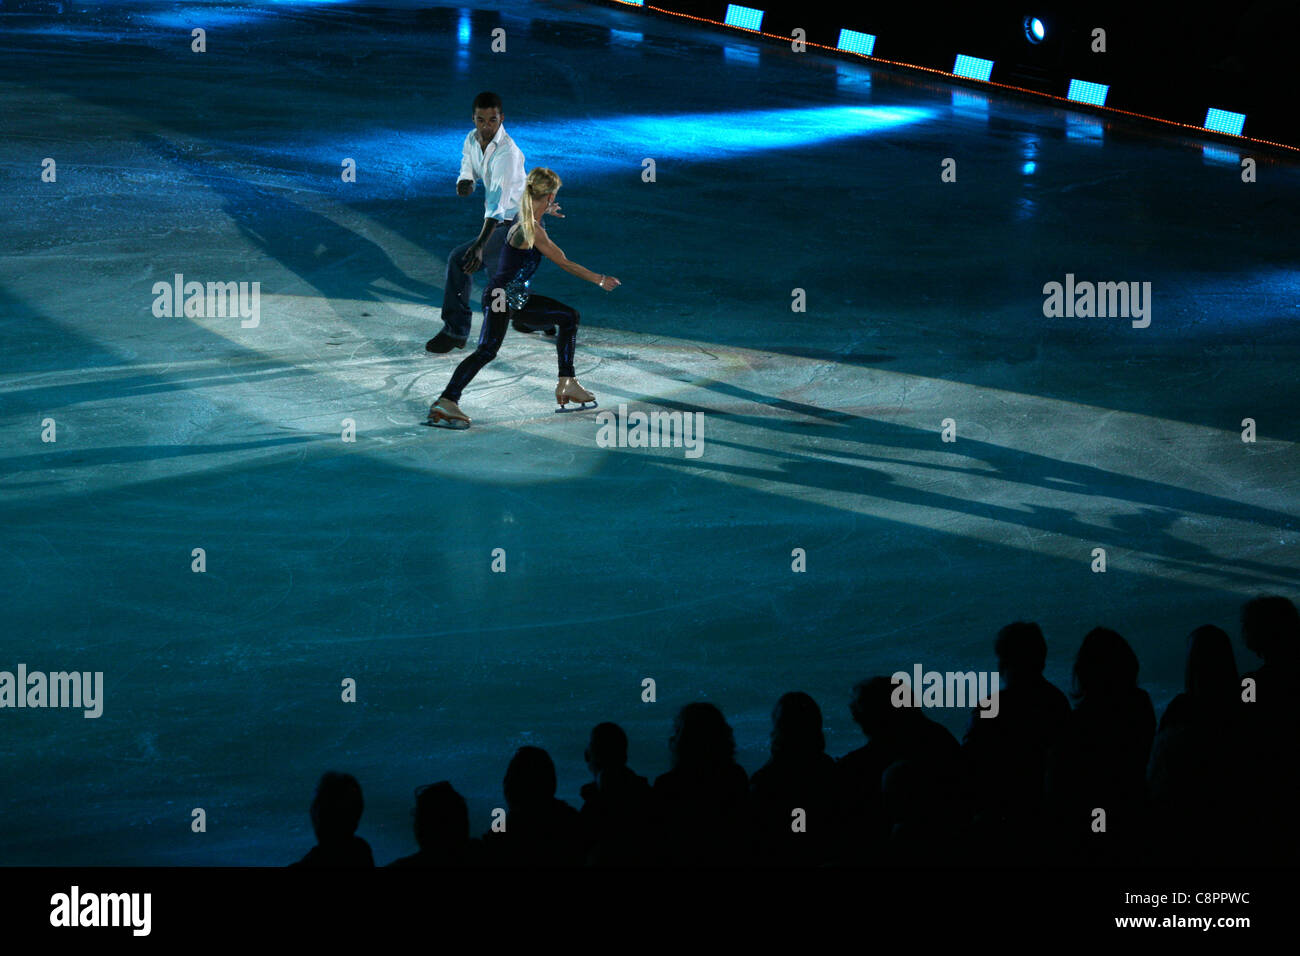 German pair skaters Robin Szolkowy and Aliona Savchenko. Ice show Kings of the Ice in Prague, Czech Republic on 9 April 2009. Stock Photo